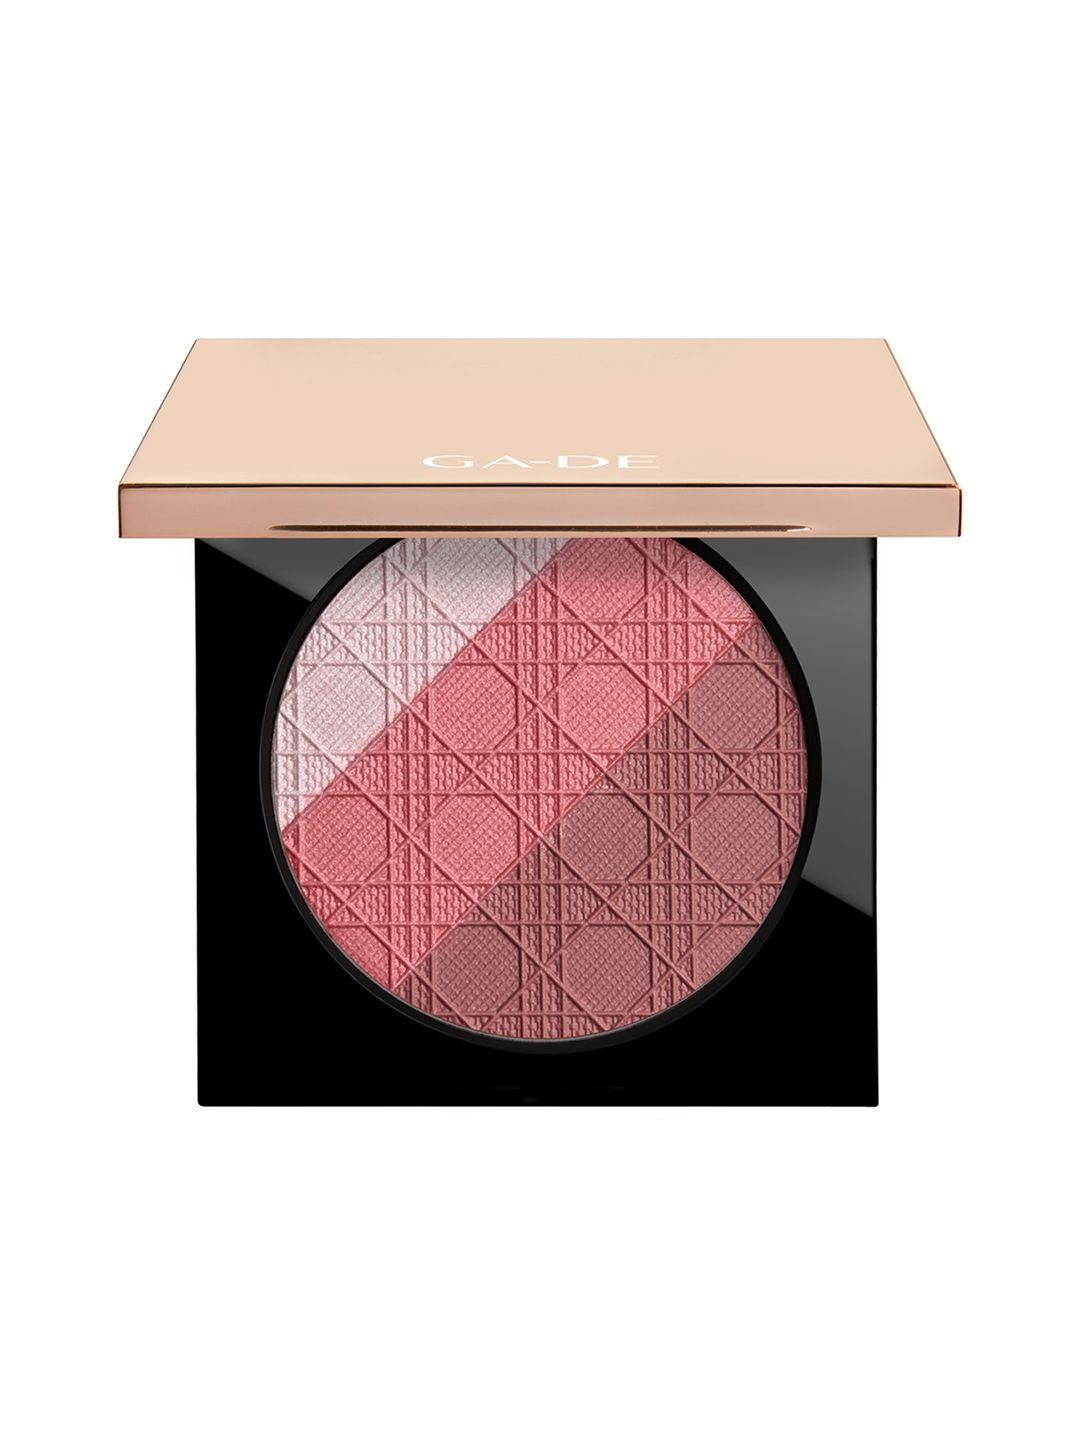 ga-de glow fx long lasting natural highlighter palette with jojoba oil - blooming chic 139